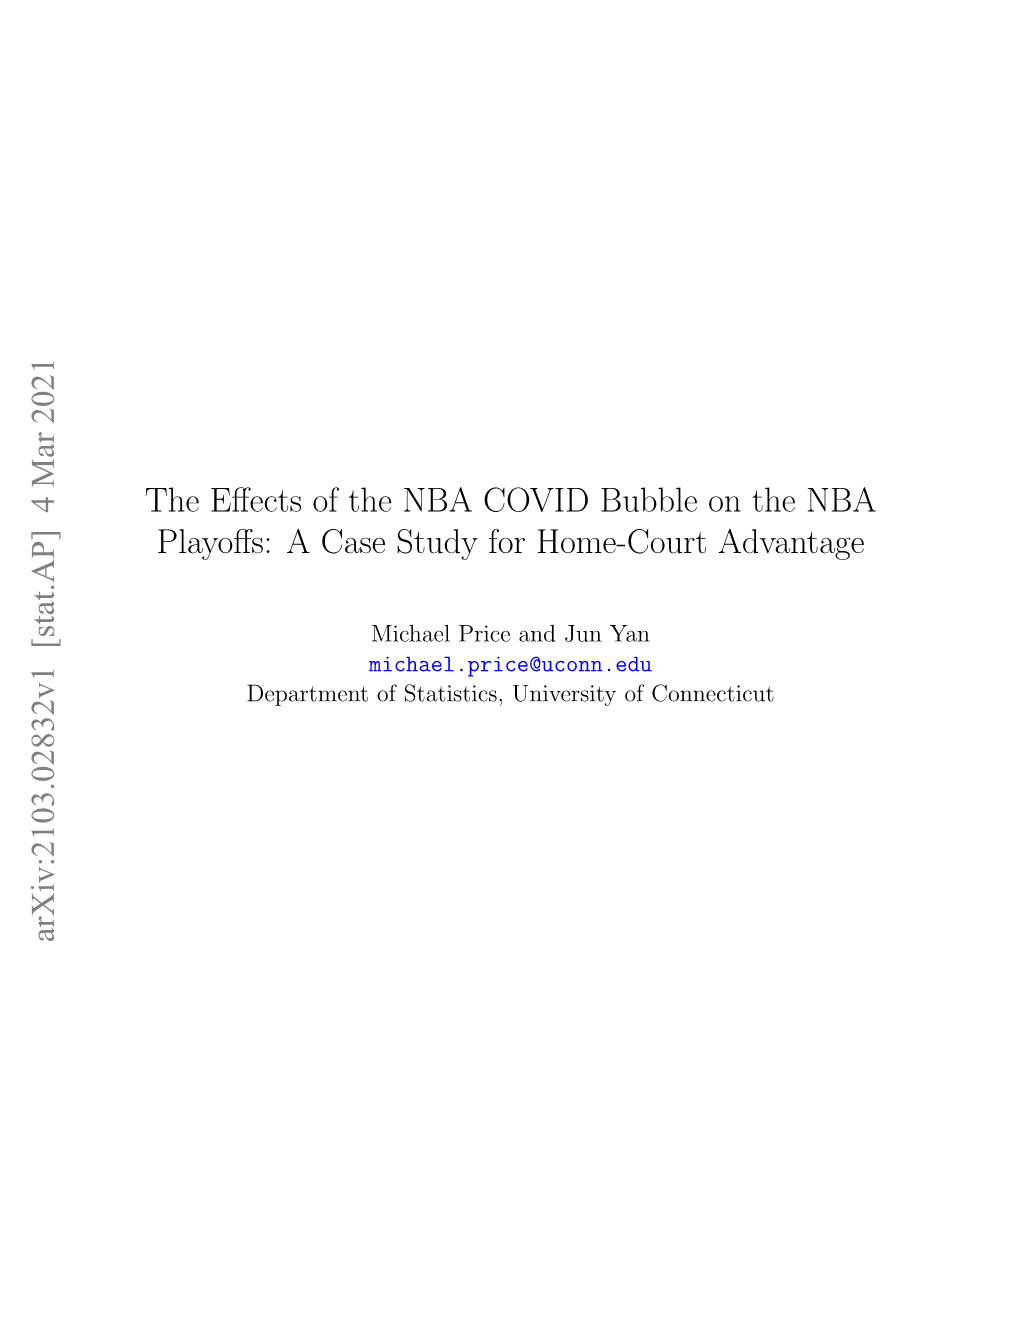 The Effects of the NBA COVID Bubble on the NBA Playoffs